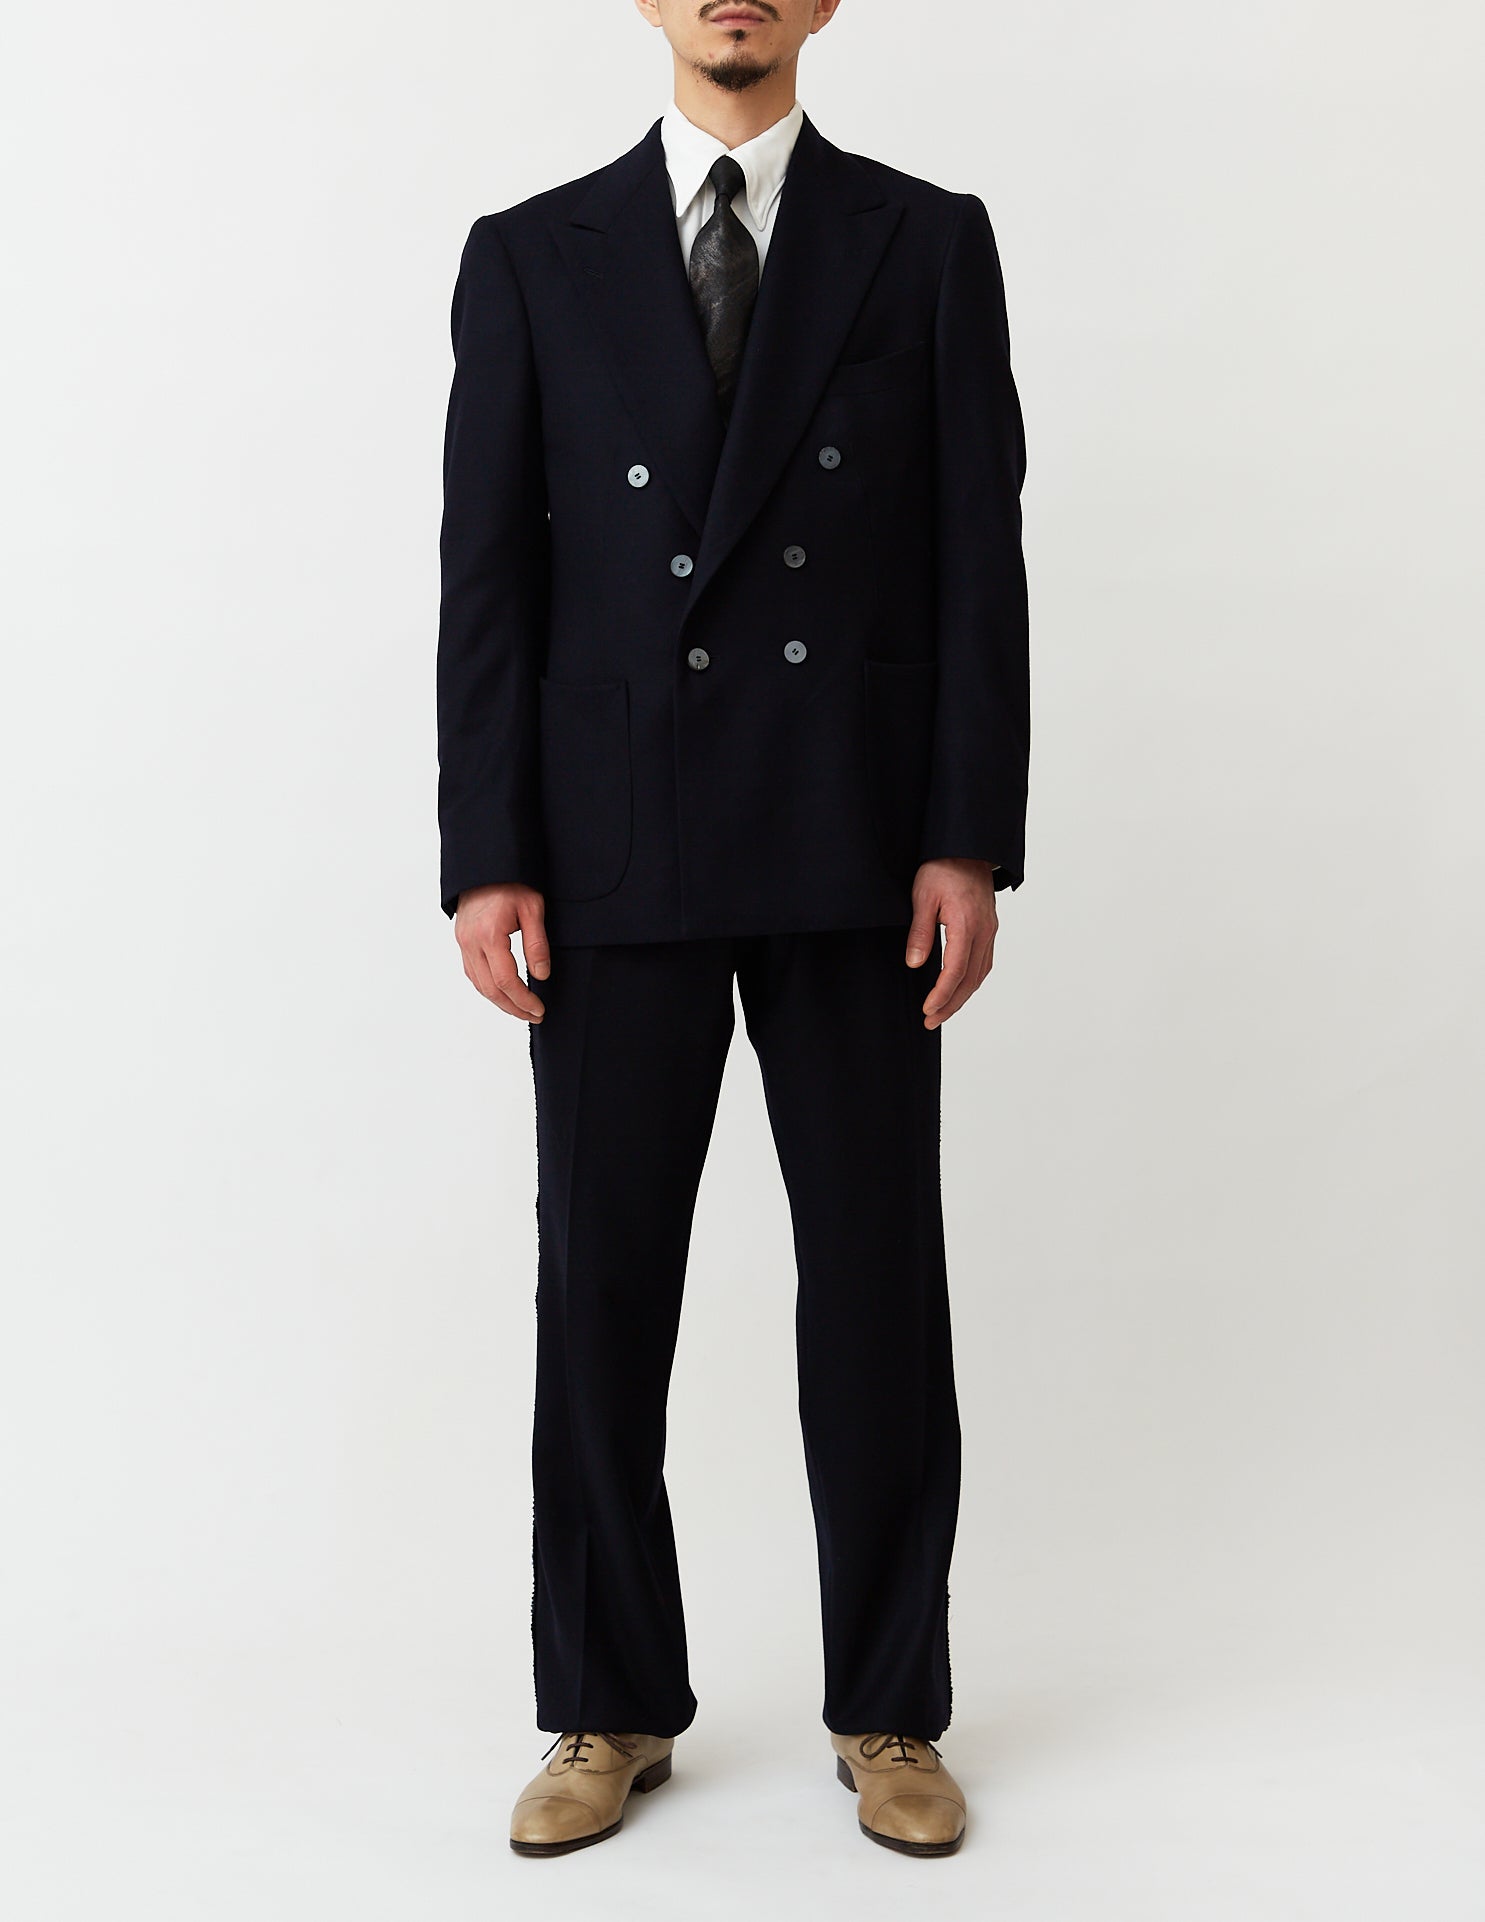 6B DOUBLE-BREASTED JACKET navy